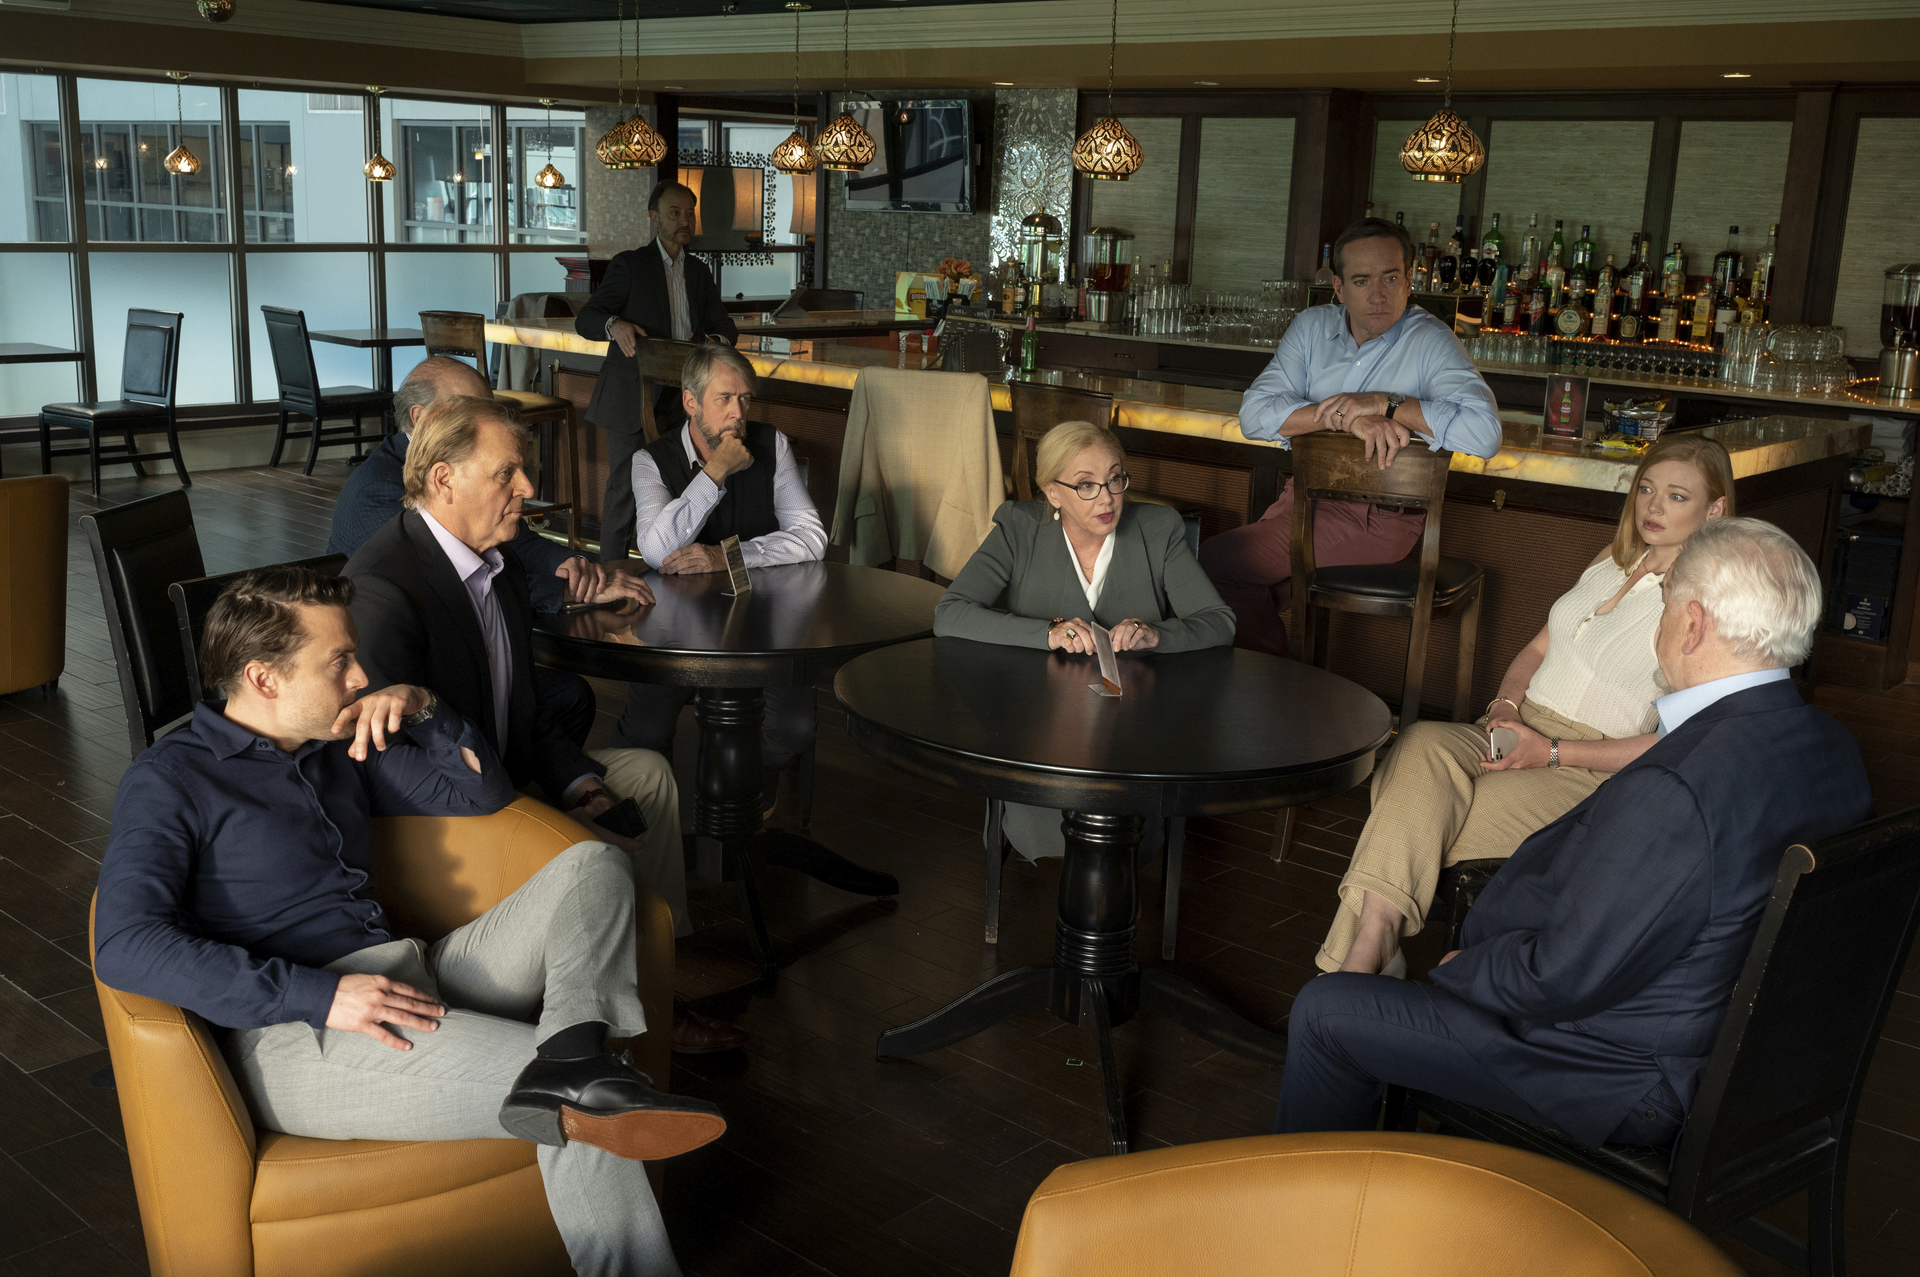 Learning from HBO’s Succession